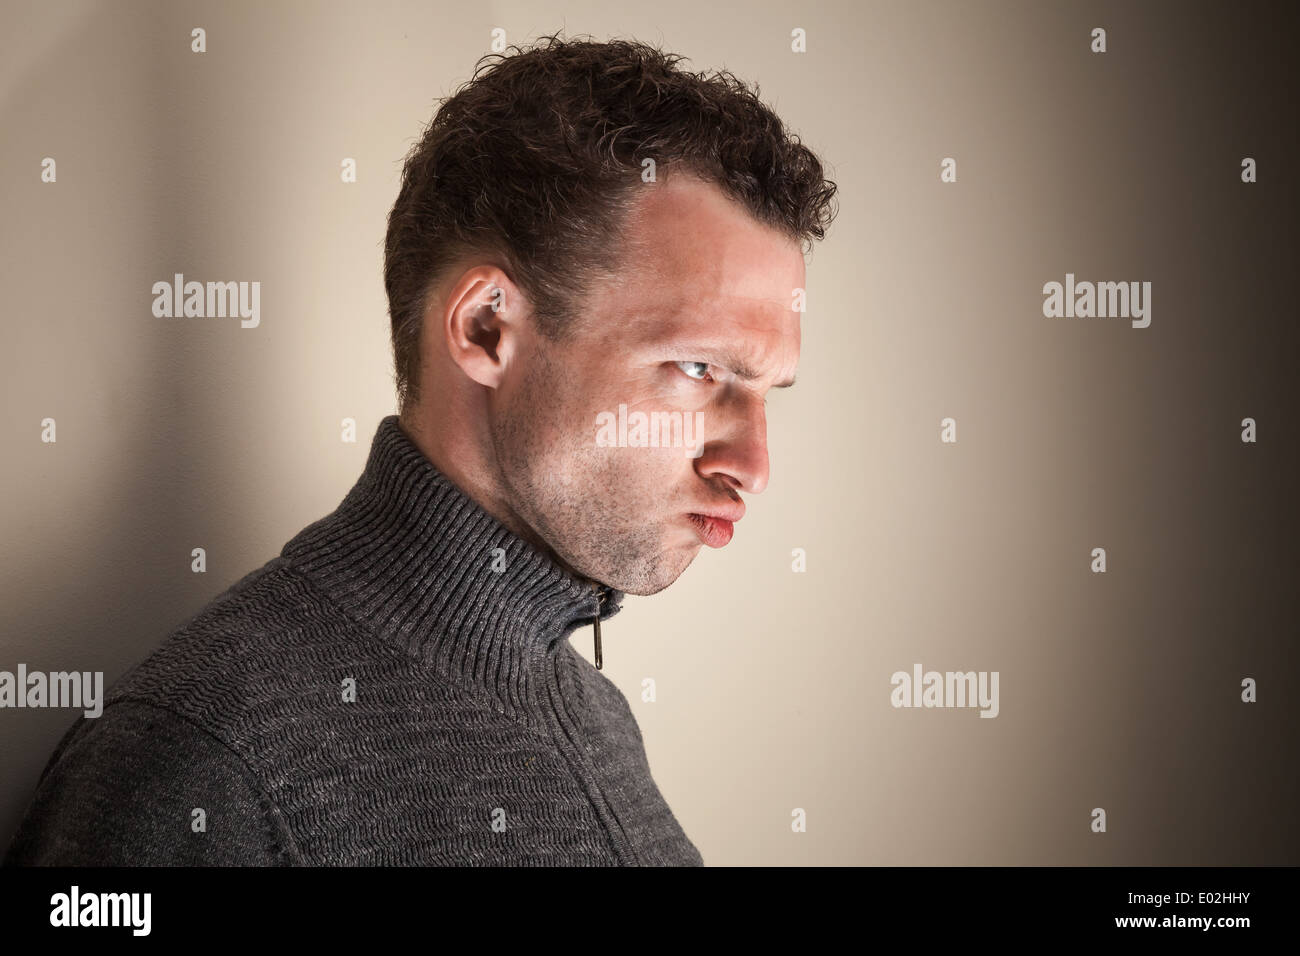 Angry emotional young Caucasian man portrait Stock Photo